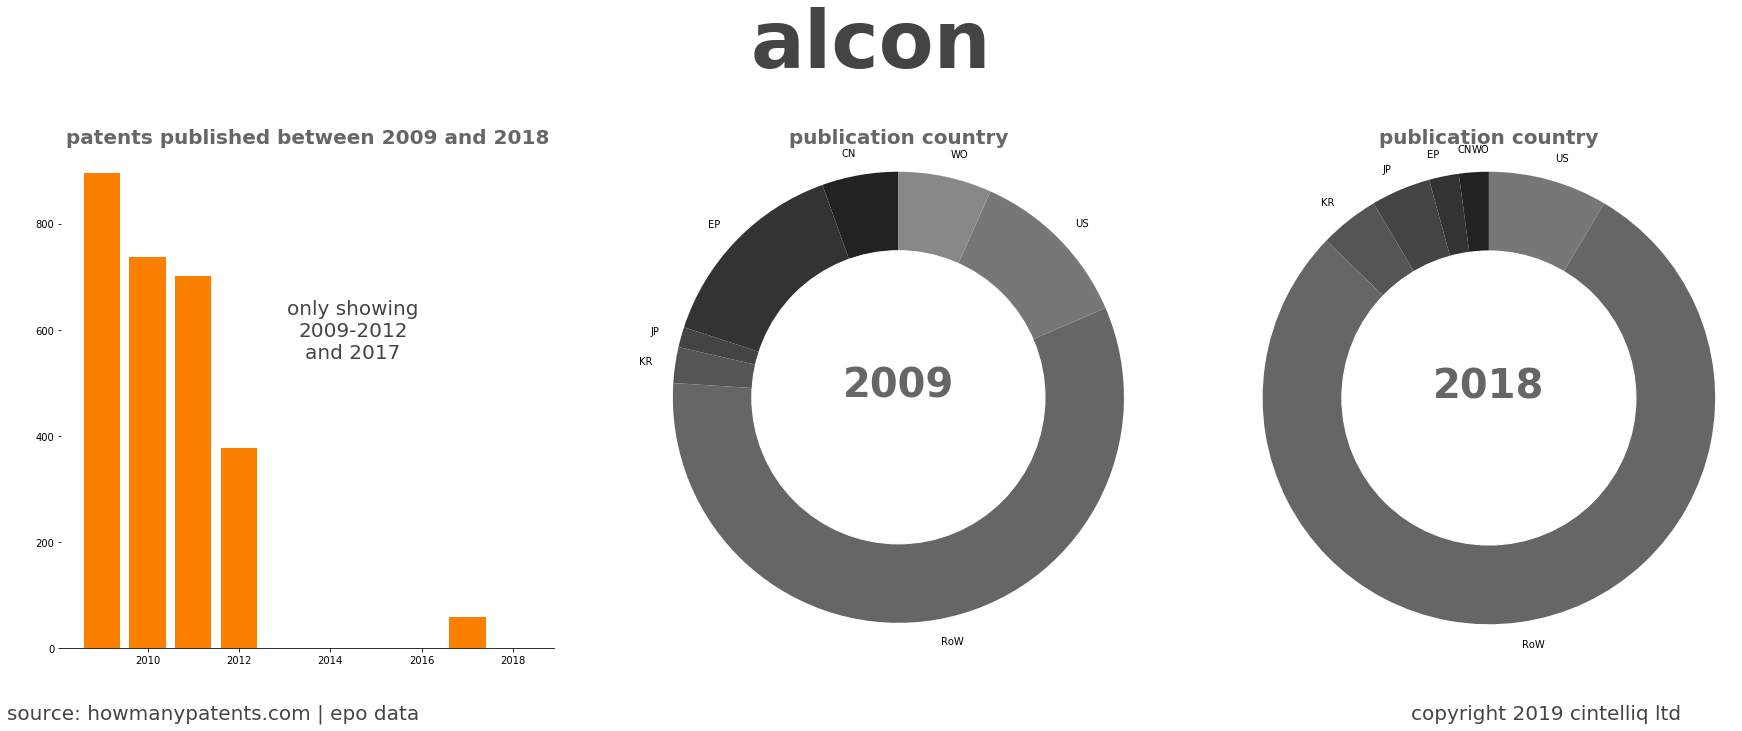 summary of patents for Alcon